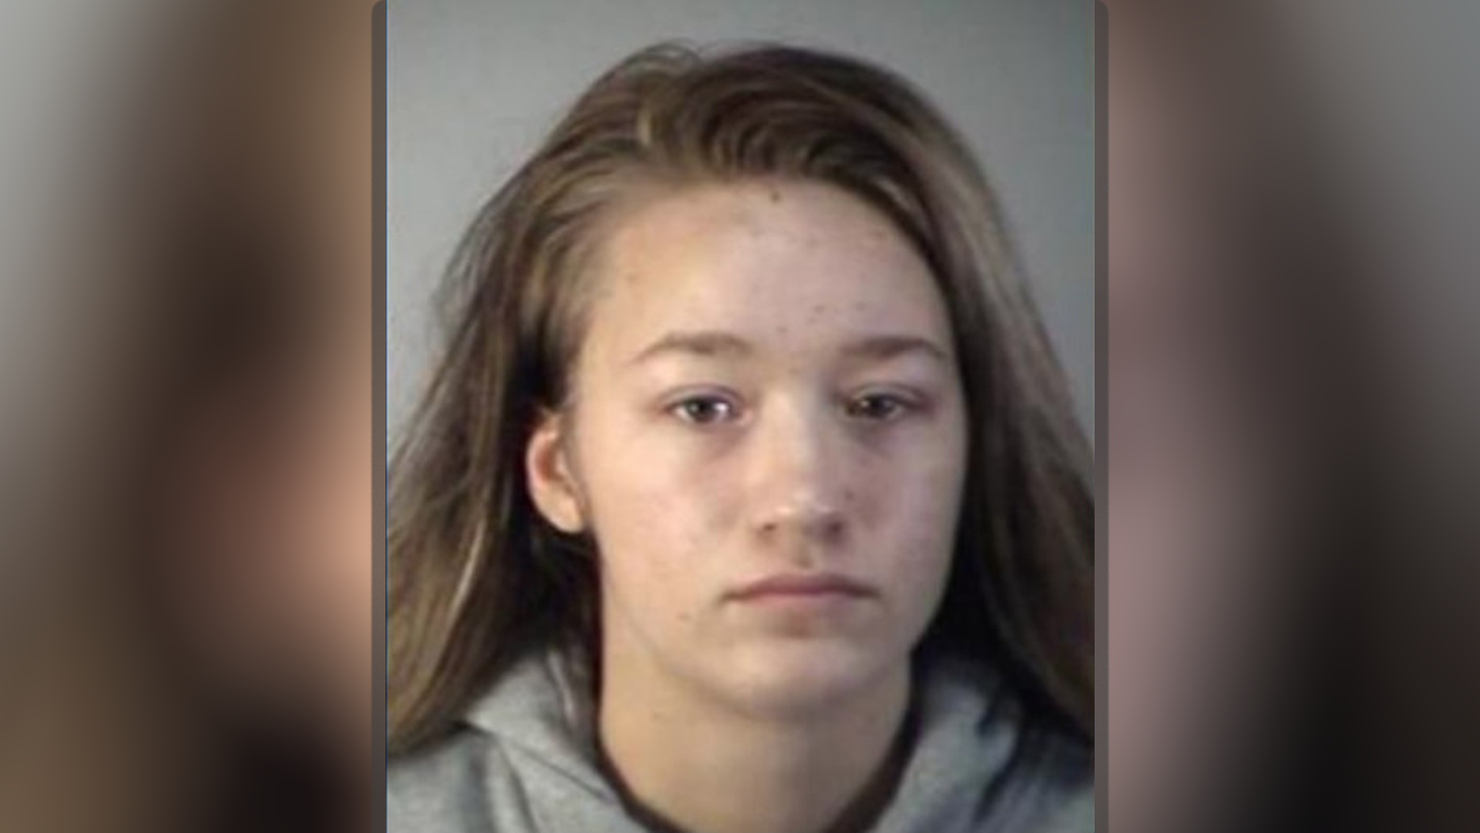 Florida Teen Charged With Trying to Hire Hitman to Kill Parents